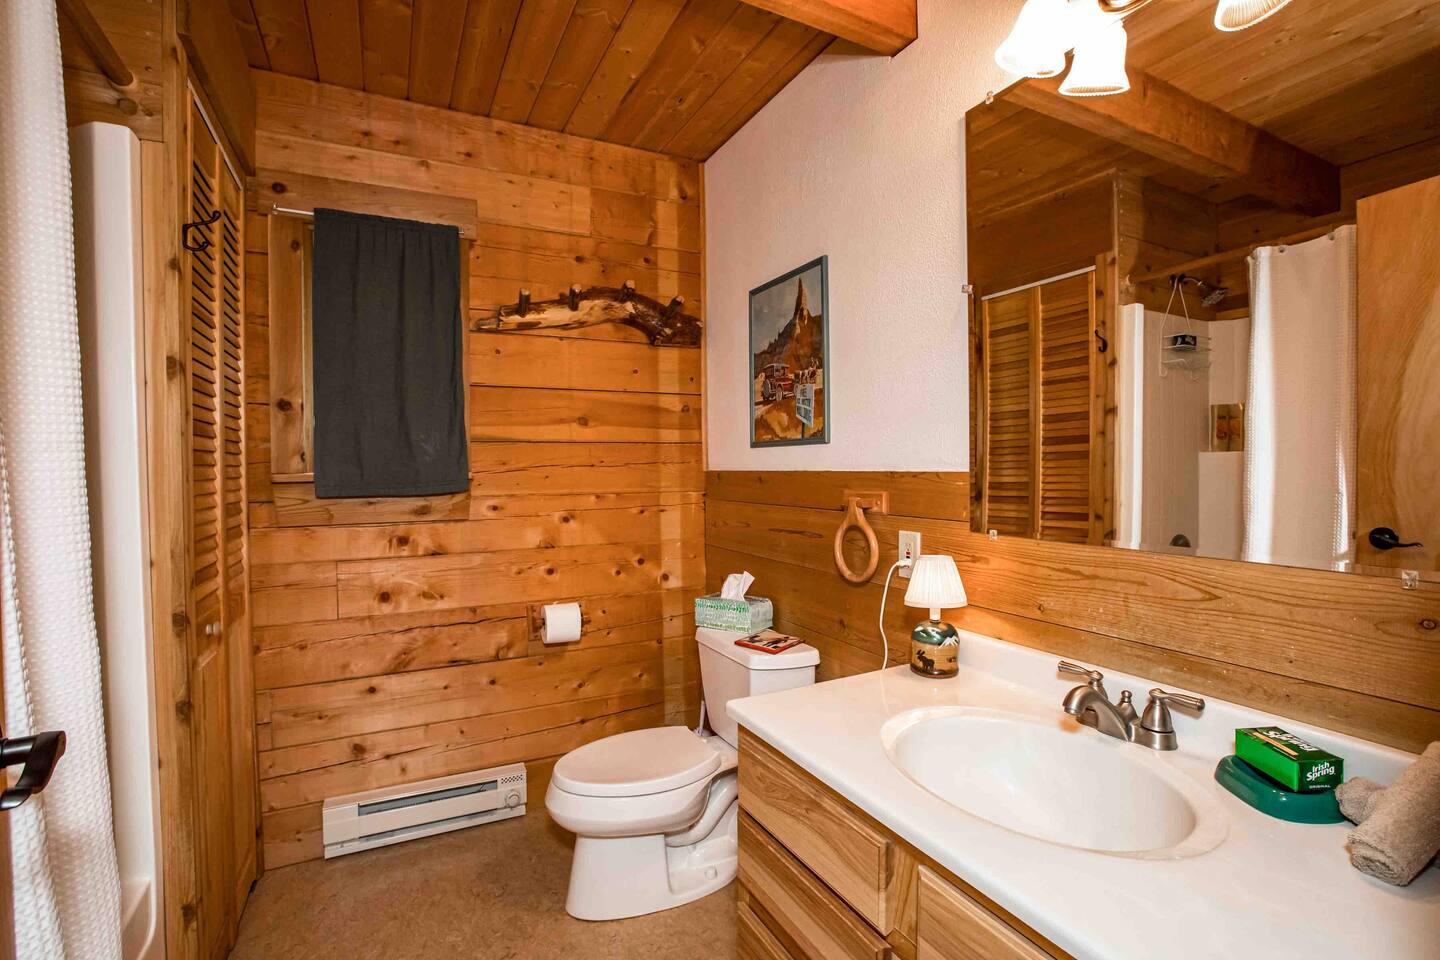 Bathroom made all of wood, with a large mirror and white sink